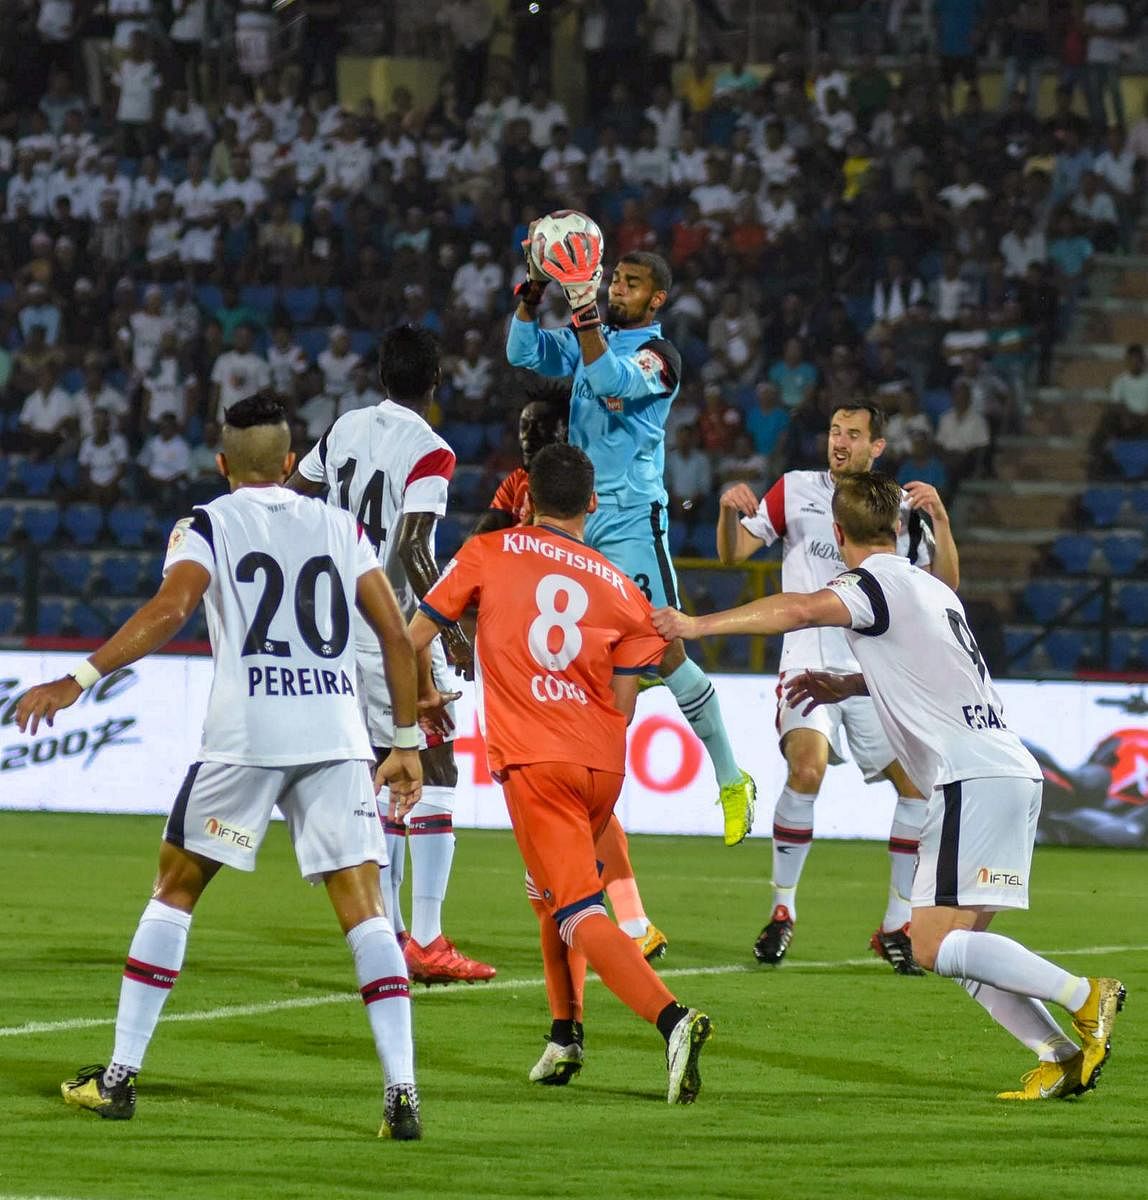 ACTION-PACKED: NorthEast United FC goalkeeper TP Rehenesh collects the ball during their match against FC Goa during their ISL match in Guwahati on Monday. (PTI Photo)